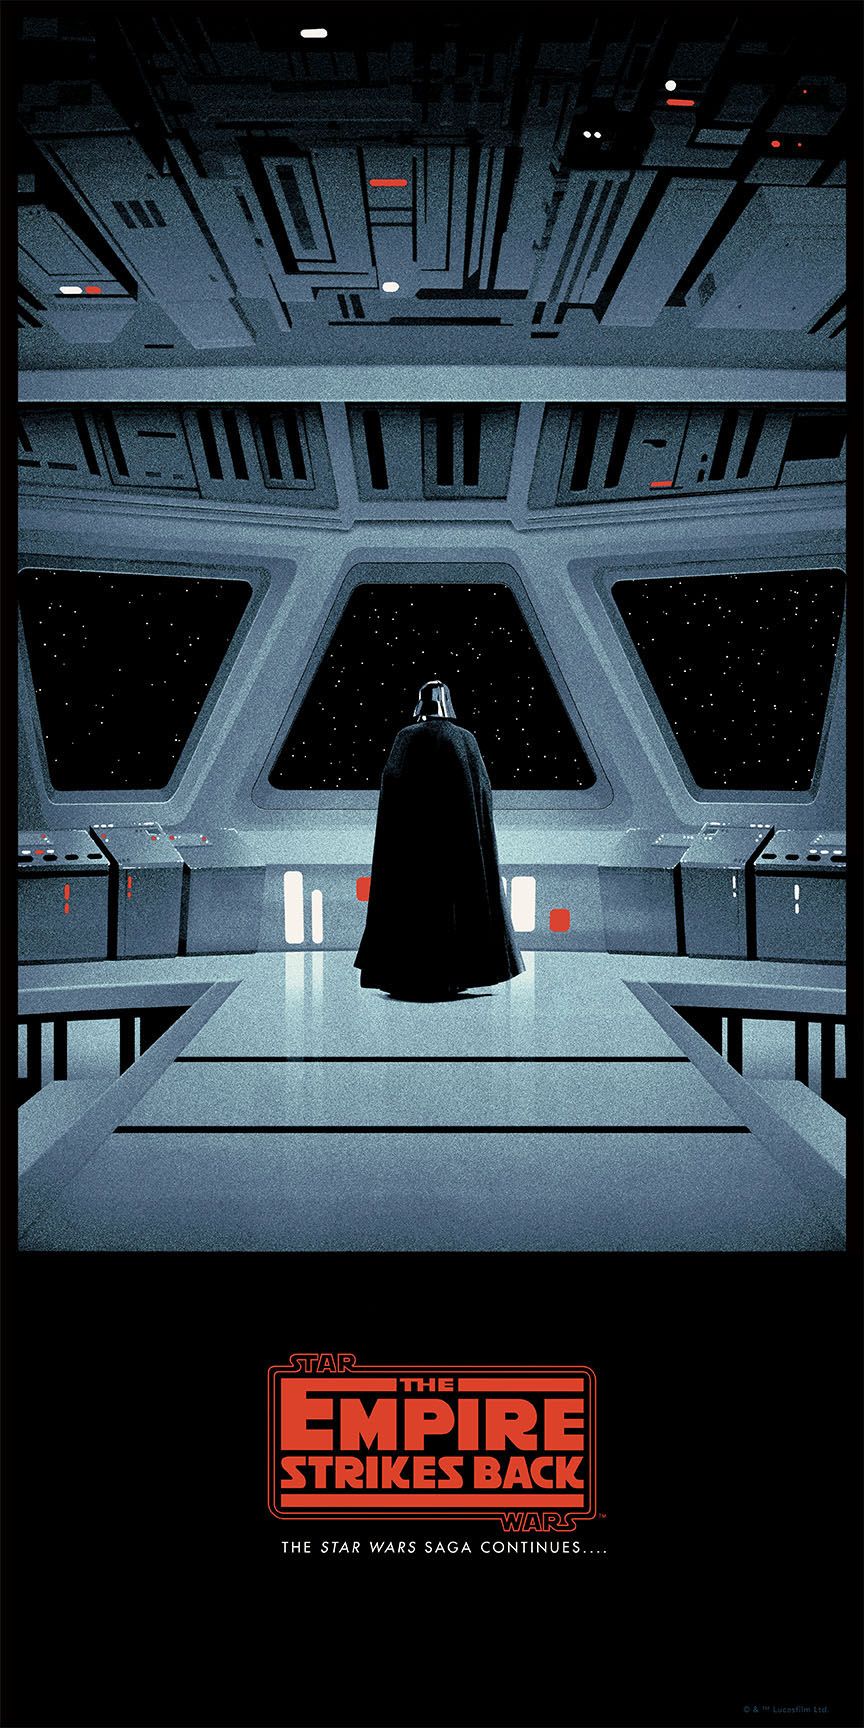 Star Wars: Episode V - The Empire Strikes Back Wallpapers